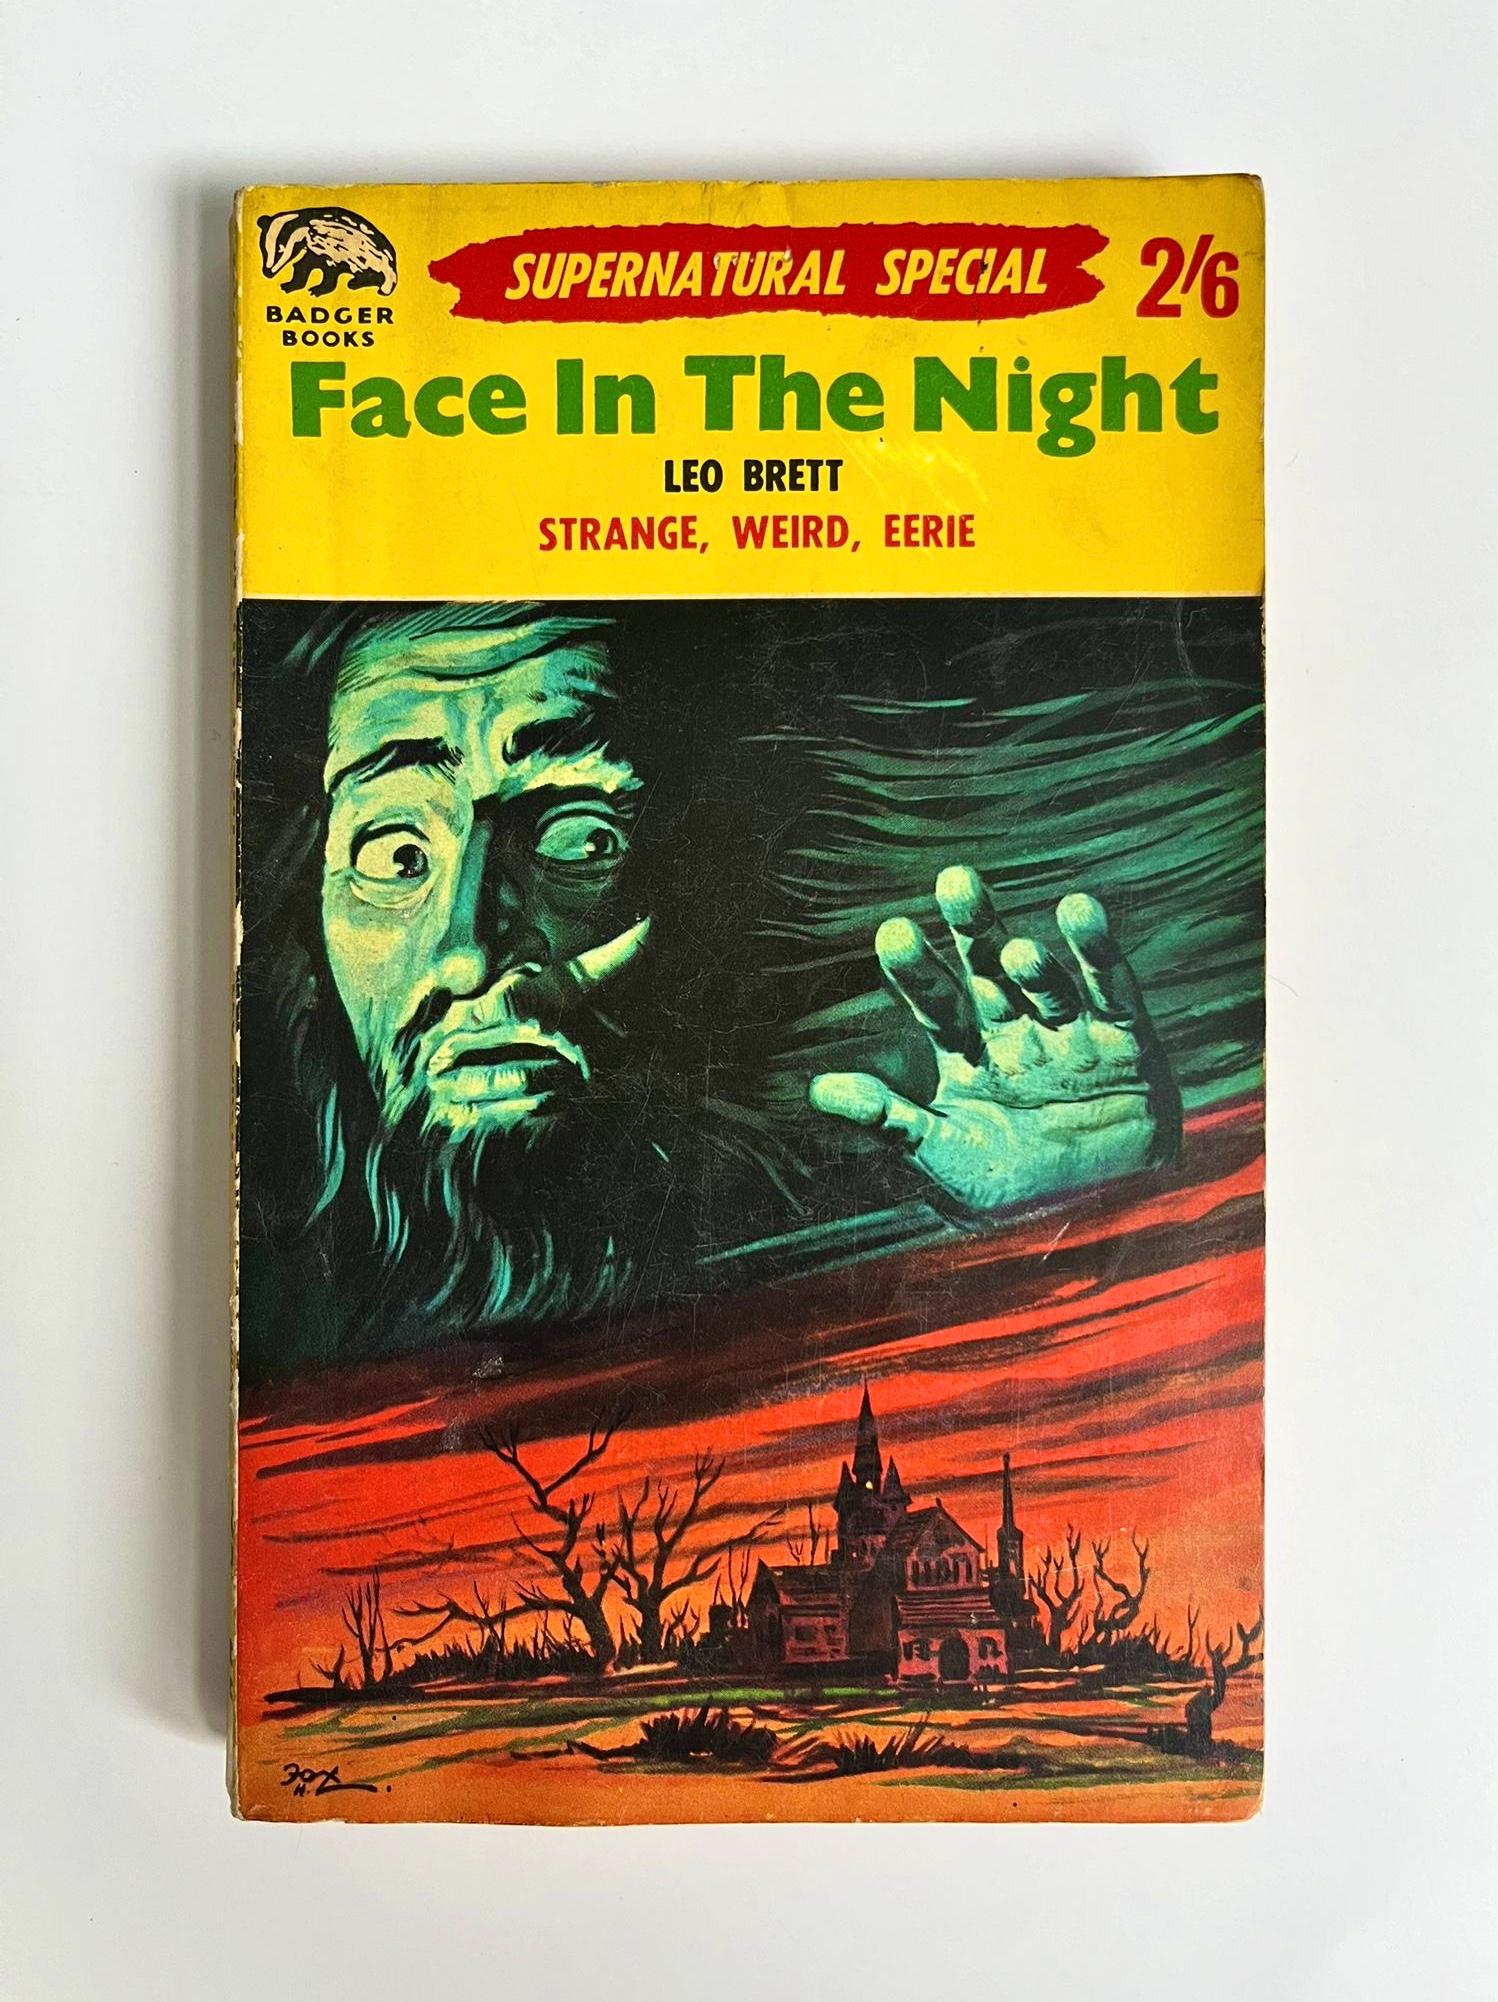 Face In The Night by Leo Brett (Lionel Fanthorpe)